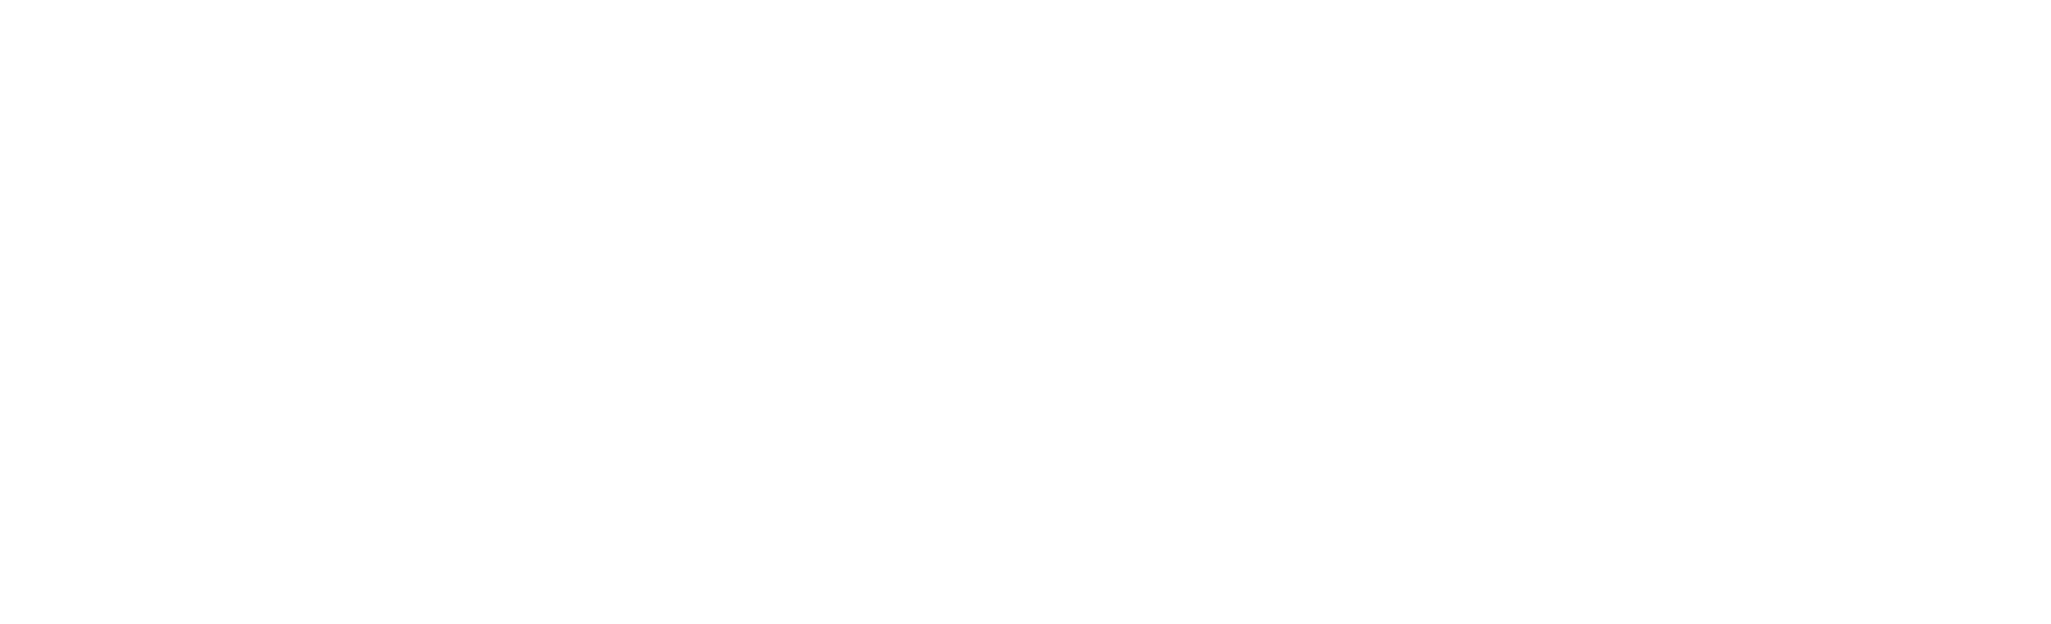 Phase5®_logo and tagline_Wht